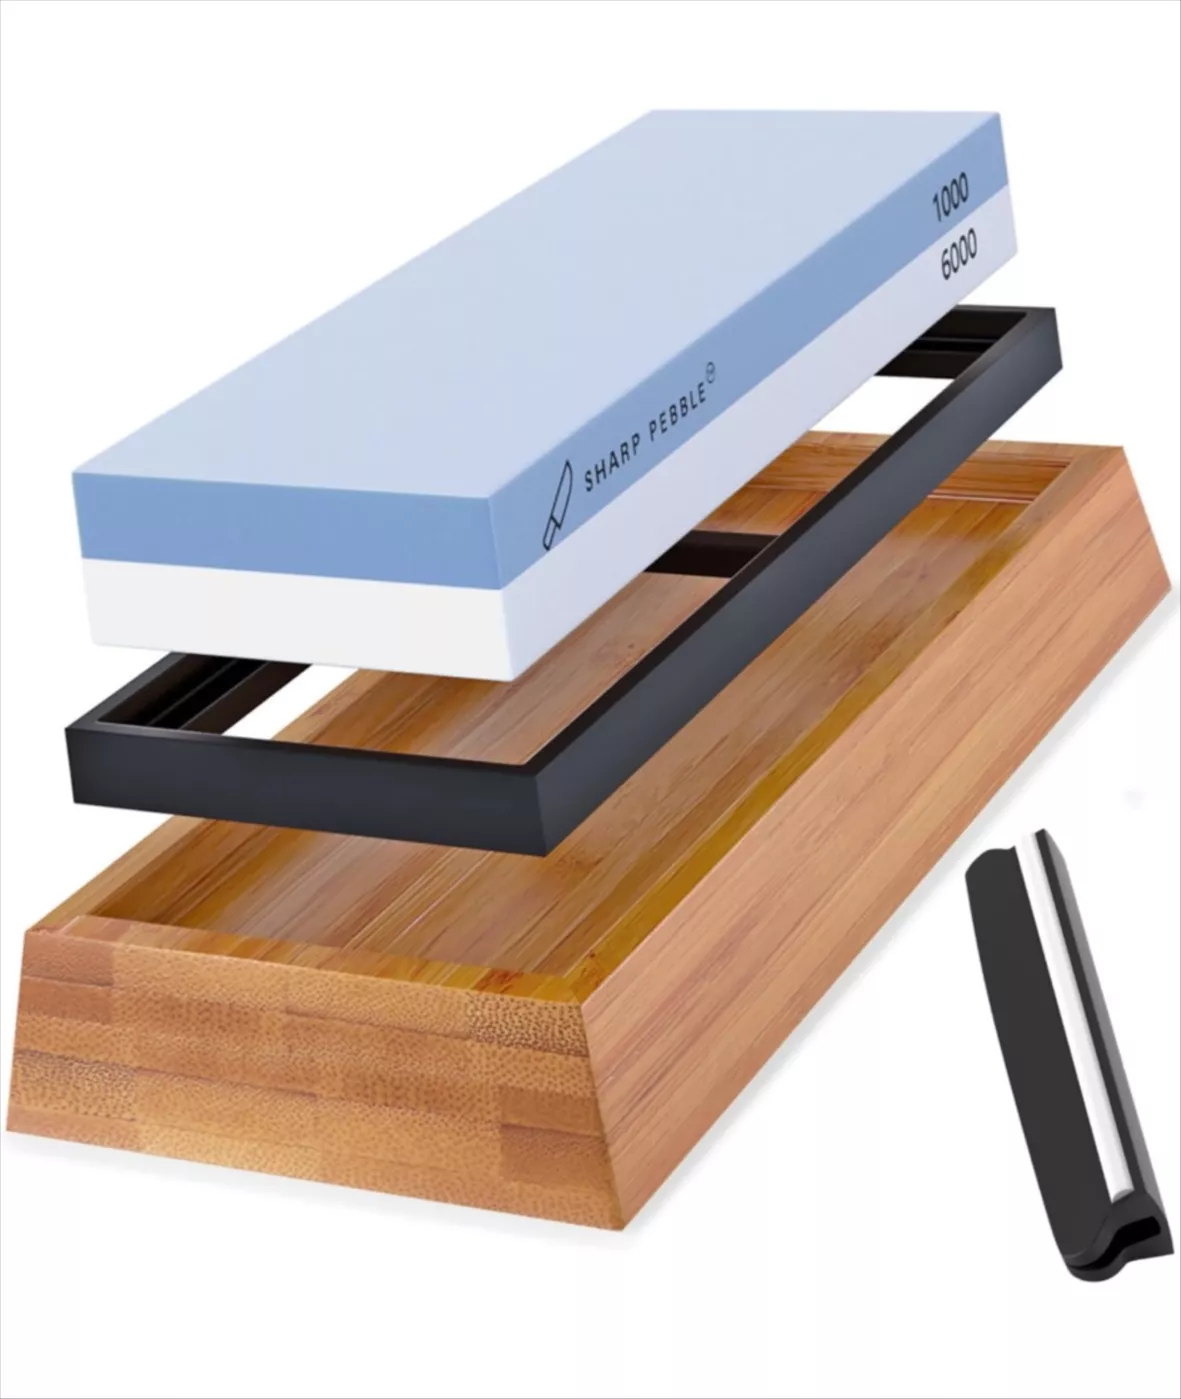 Sharp Pebble Knife Sharpening Stones Kit with 400/1000 and 1000/6000 G